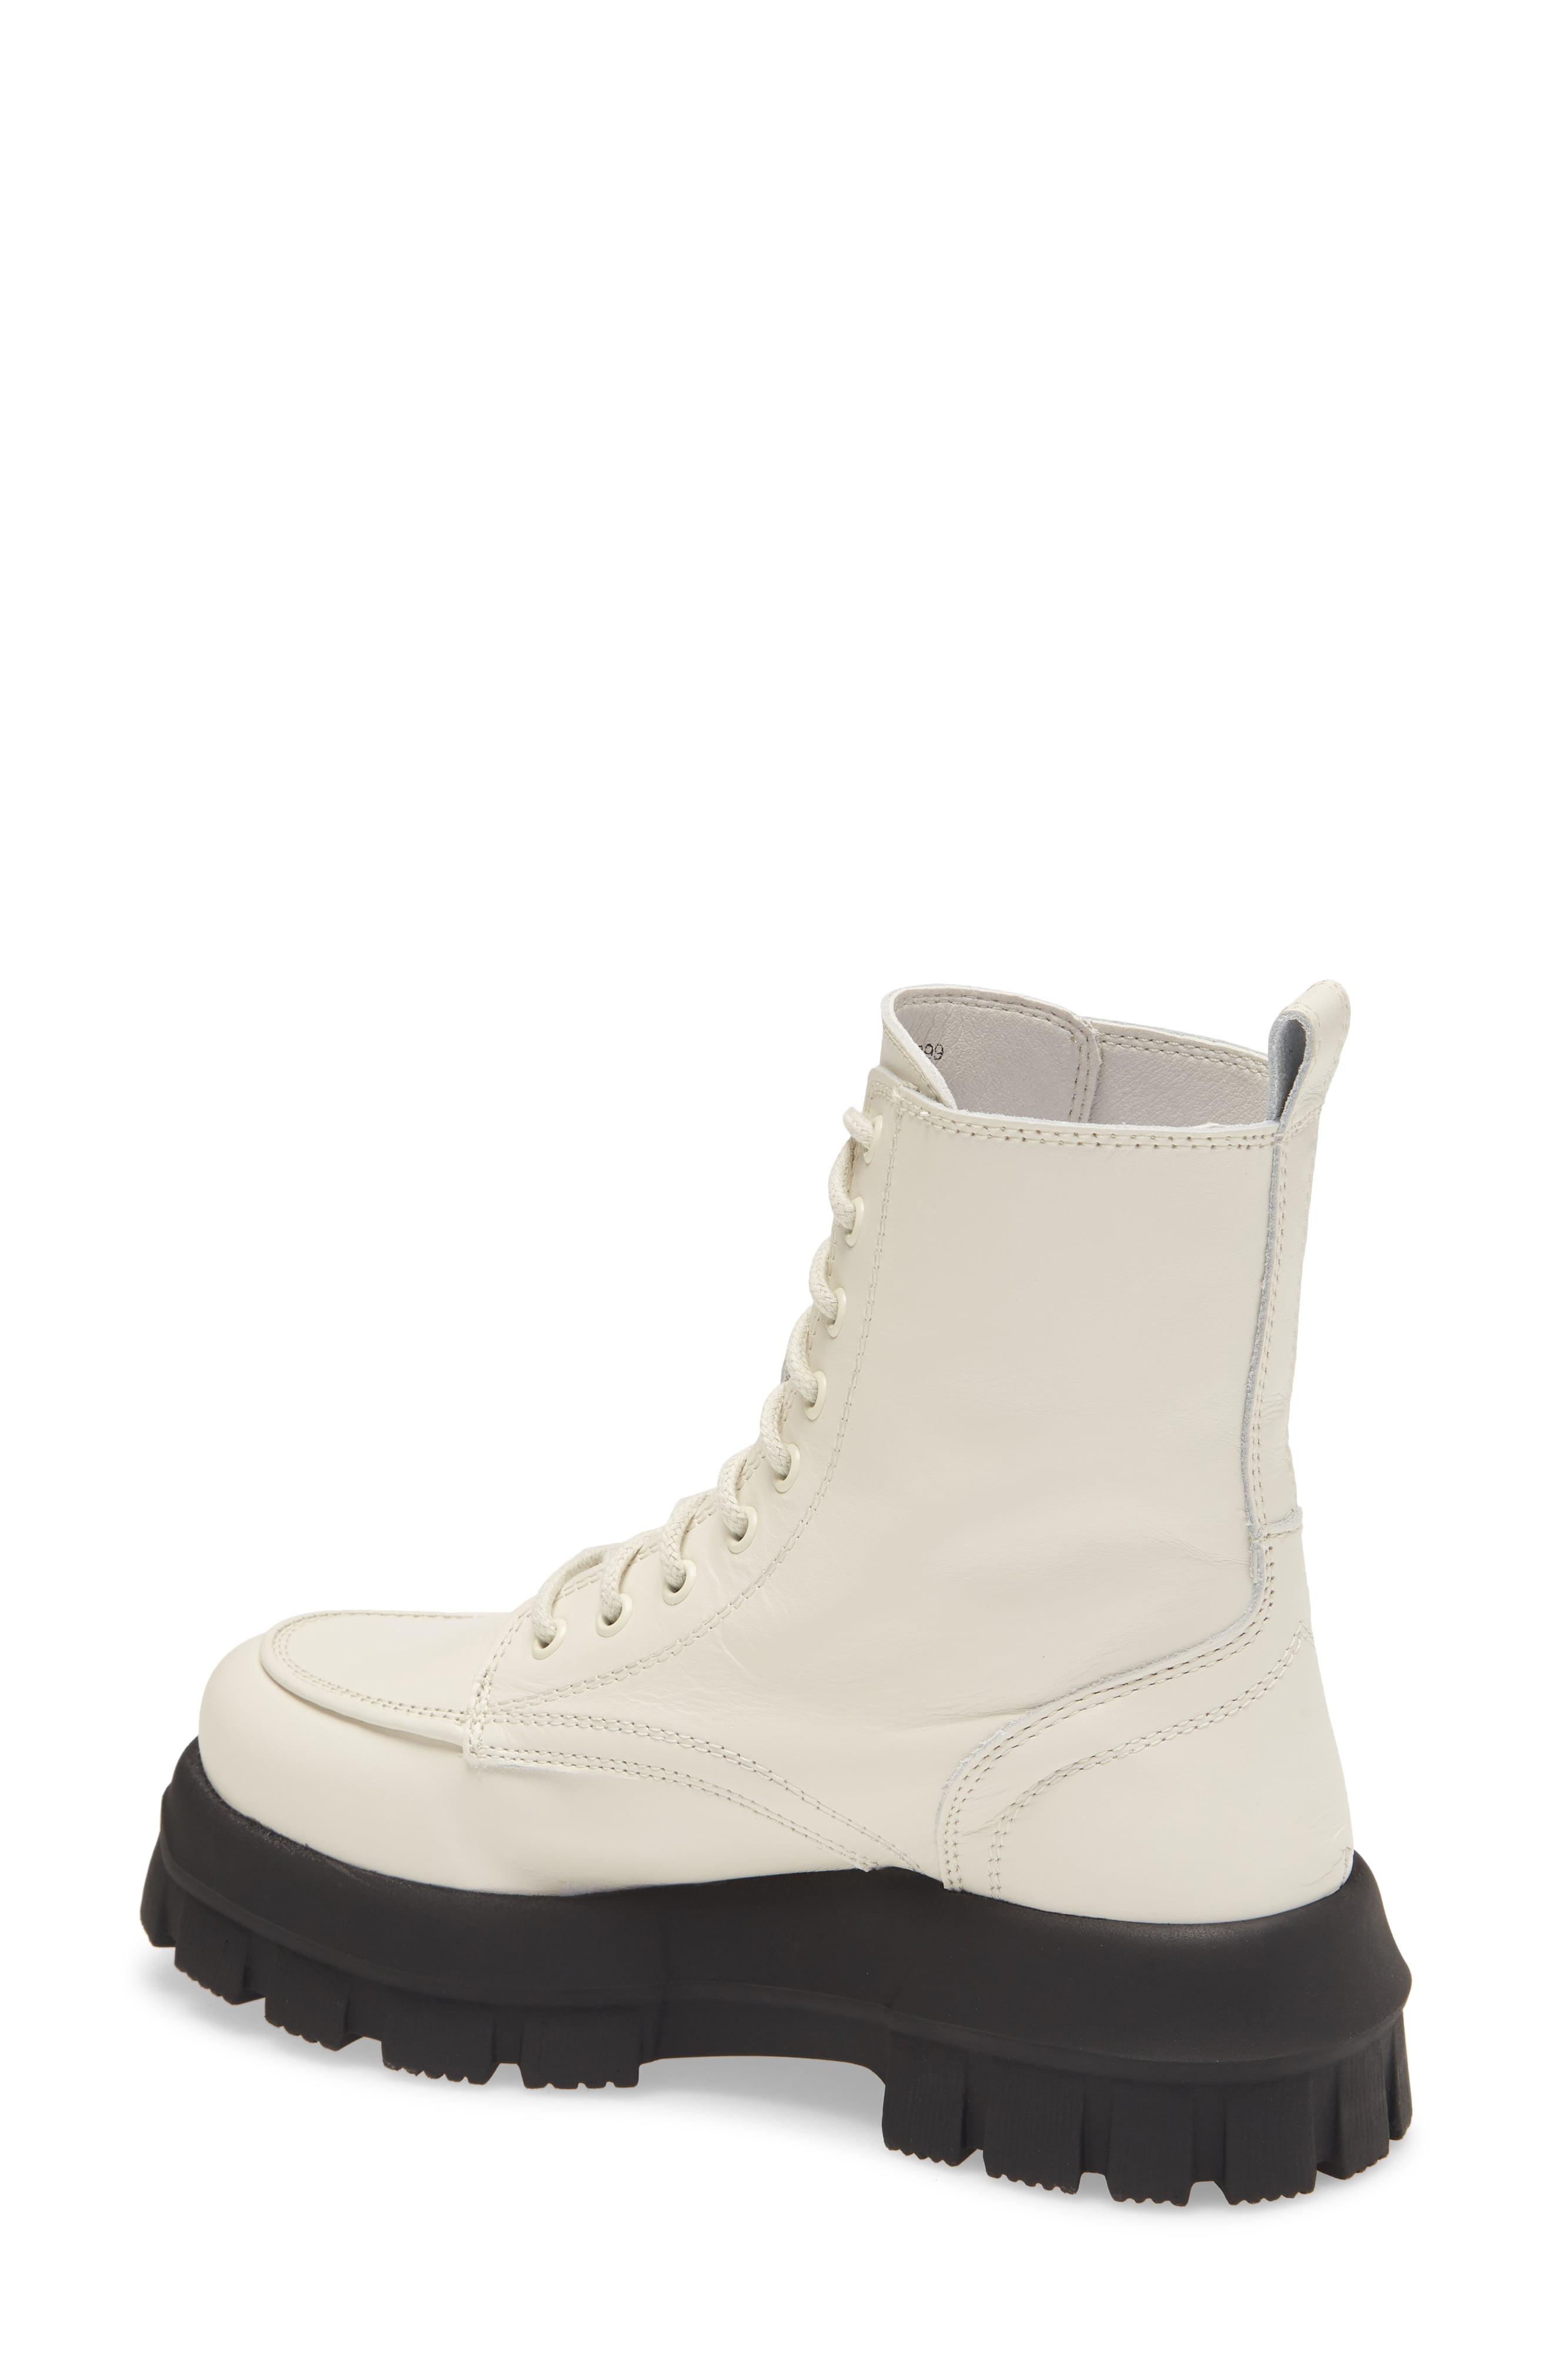 TOPSHOP Ava Ecru Leather Chunky Lace Up Boots in Cream (White) - Lyst